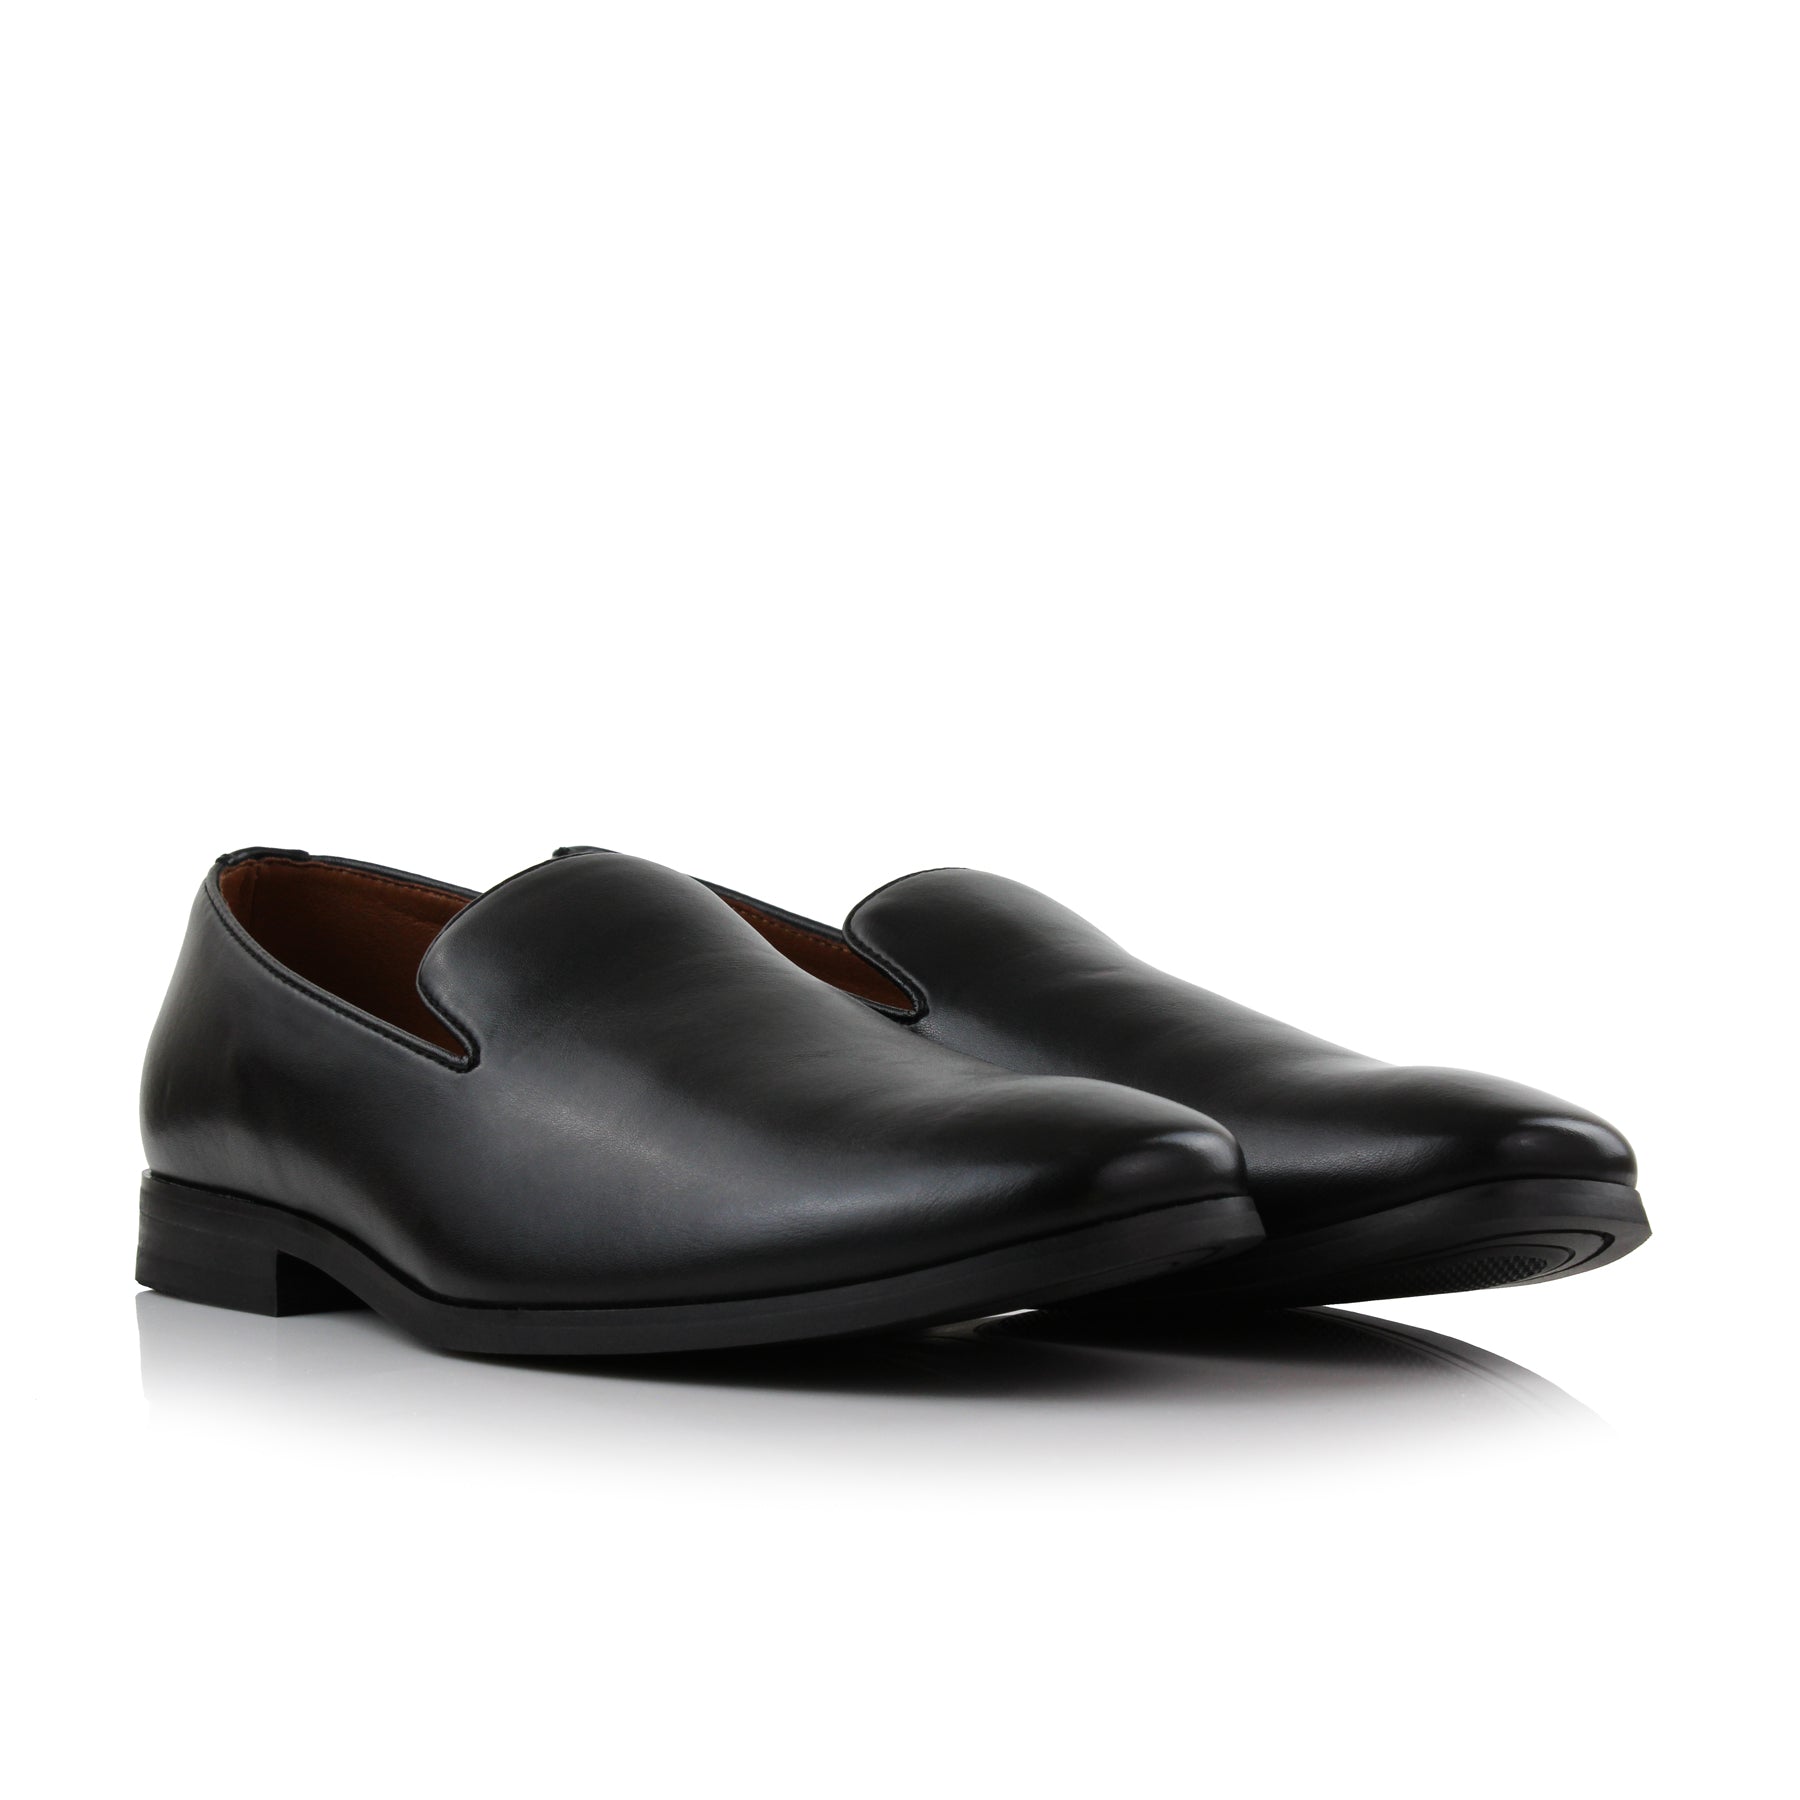 Wholecut Loafers | Clyde by Ferro Aldo | Conal Footwear | Paired Angle View